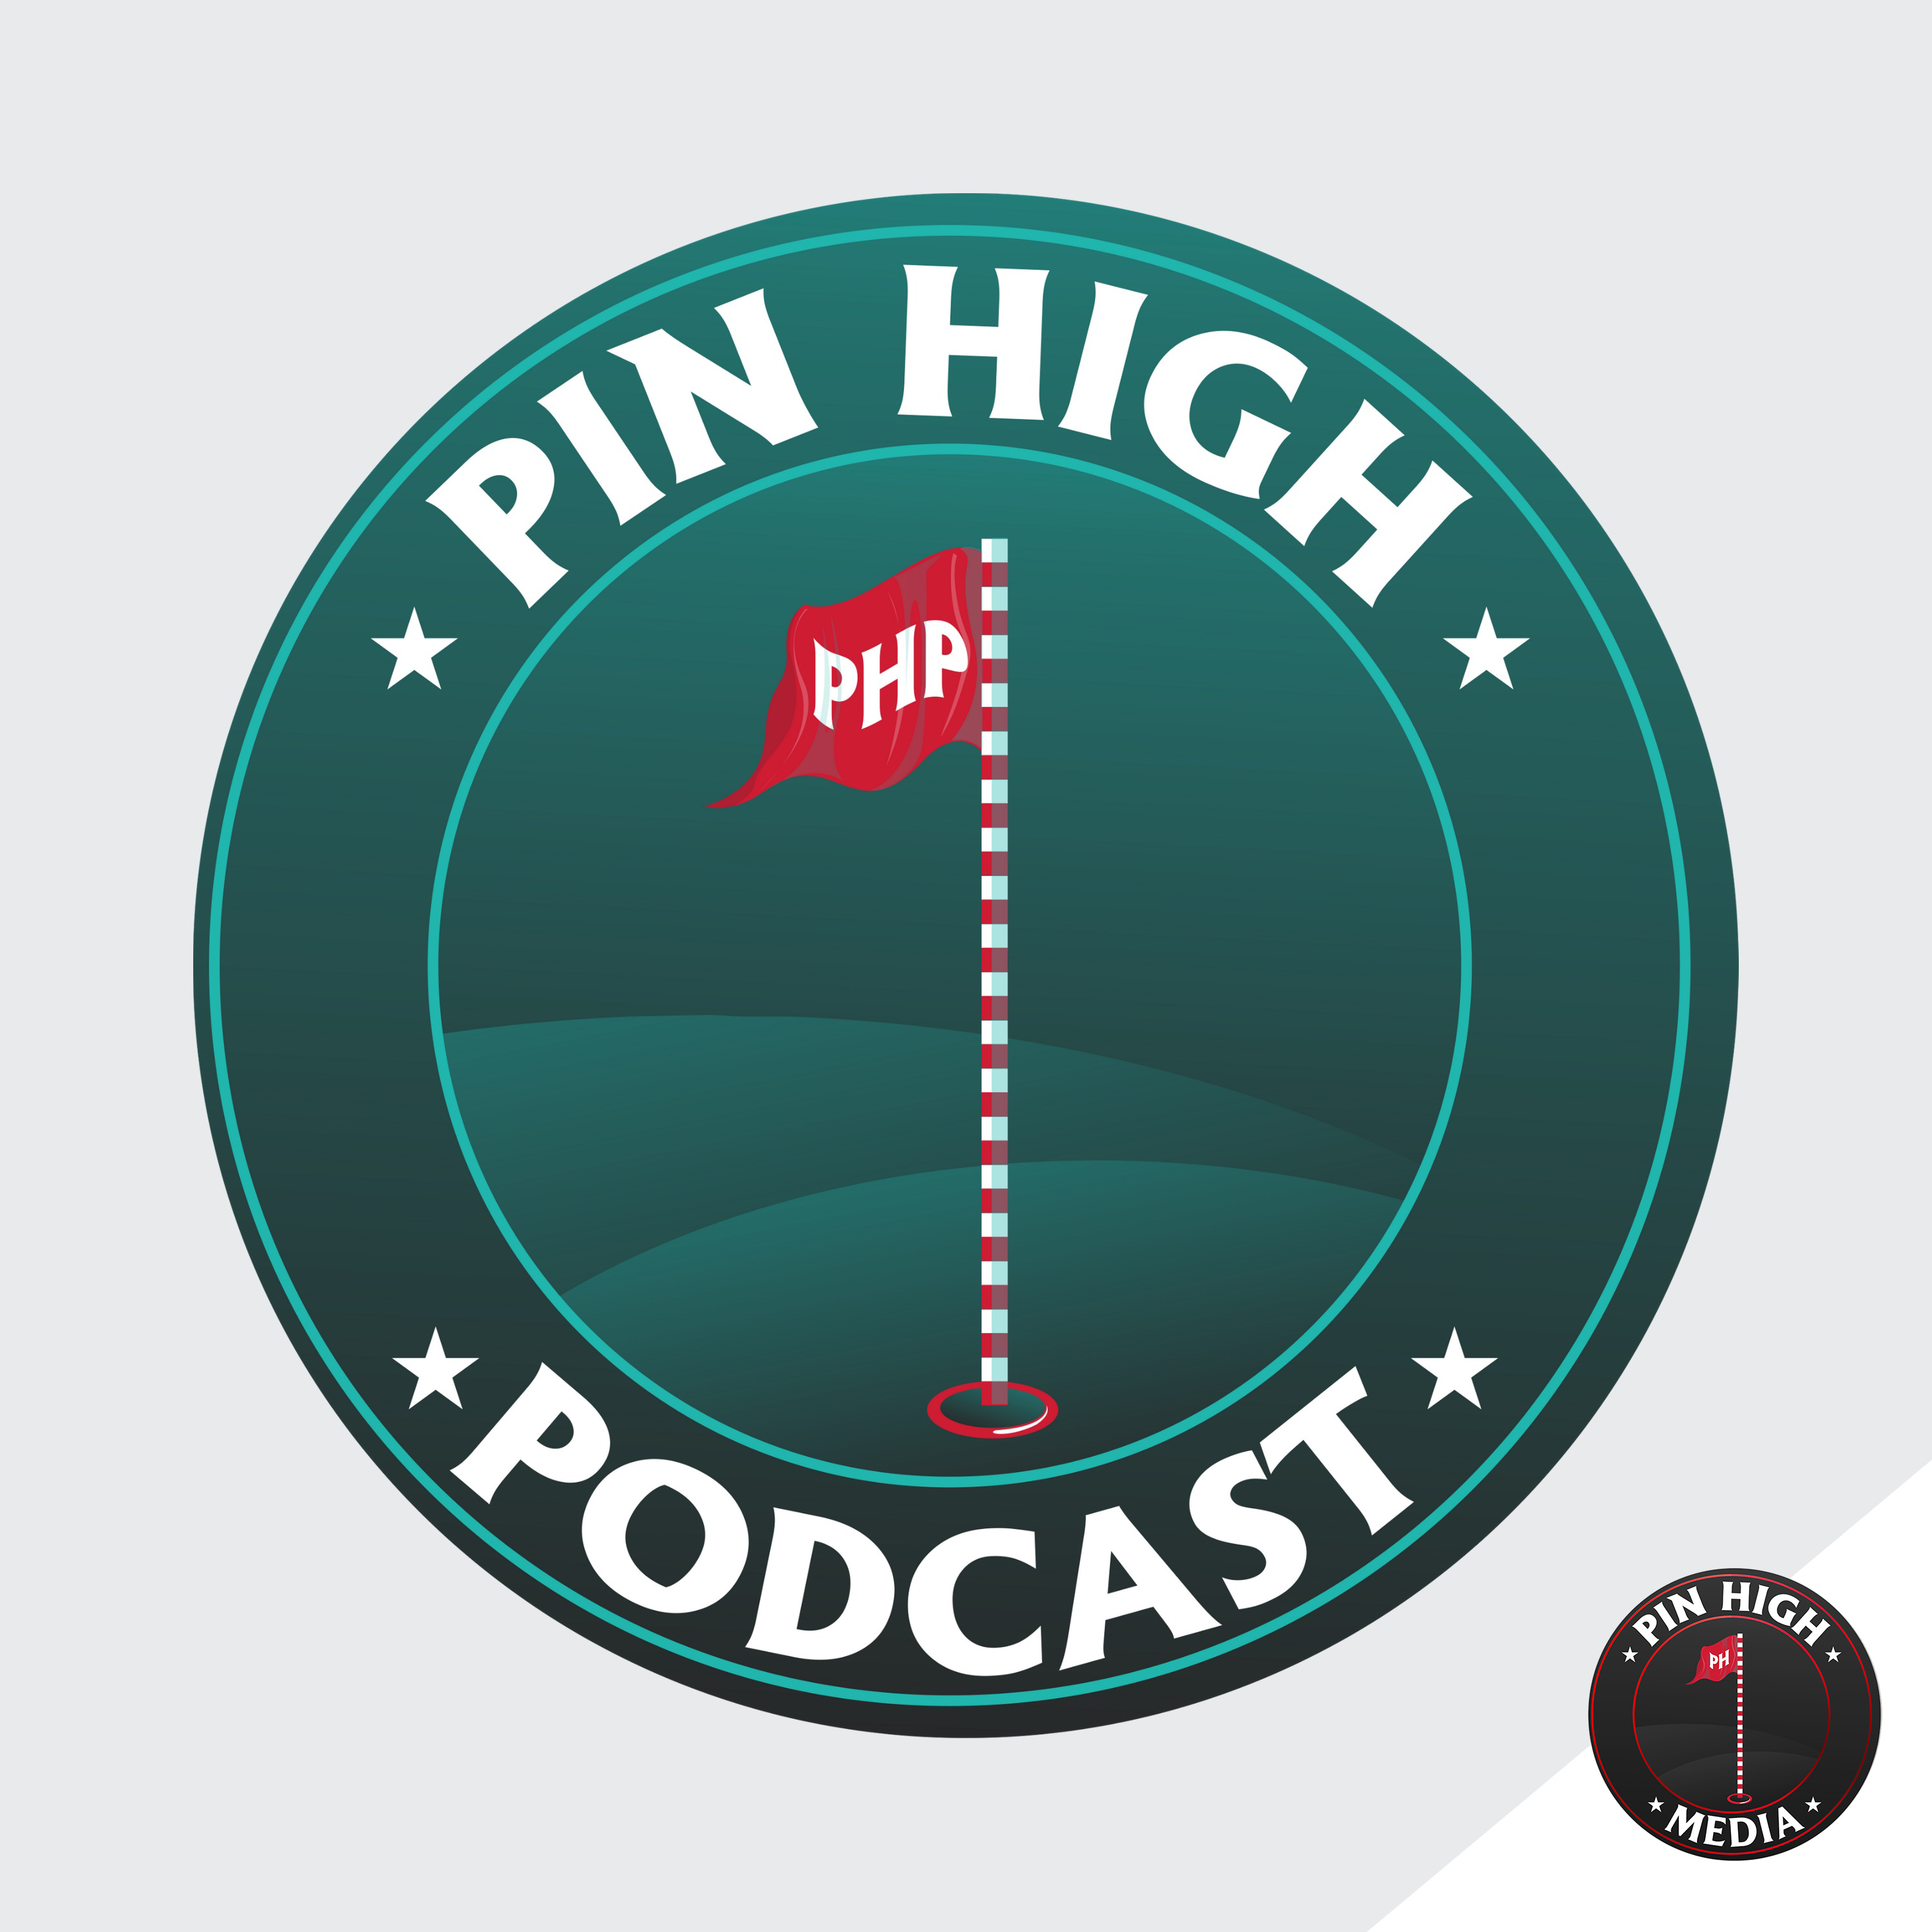 Pin High Podcast Ep. 183: PGA TOUR and LIV Golf are Merging!